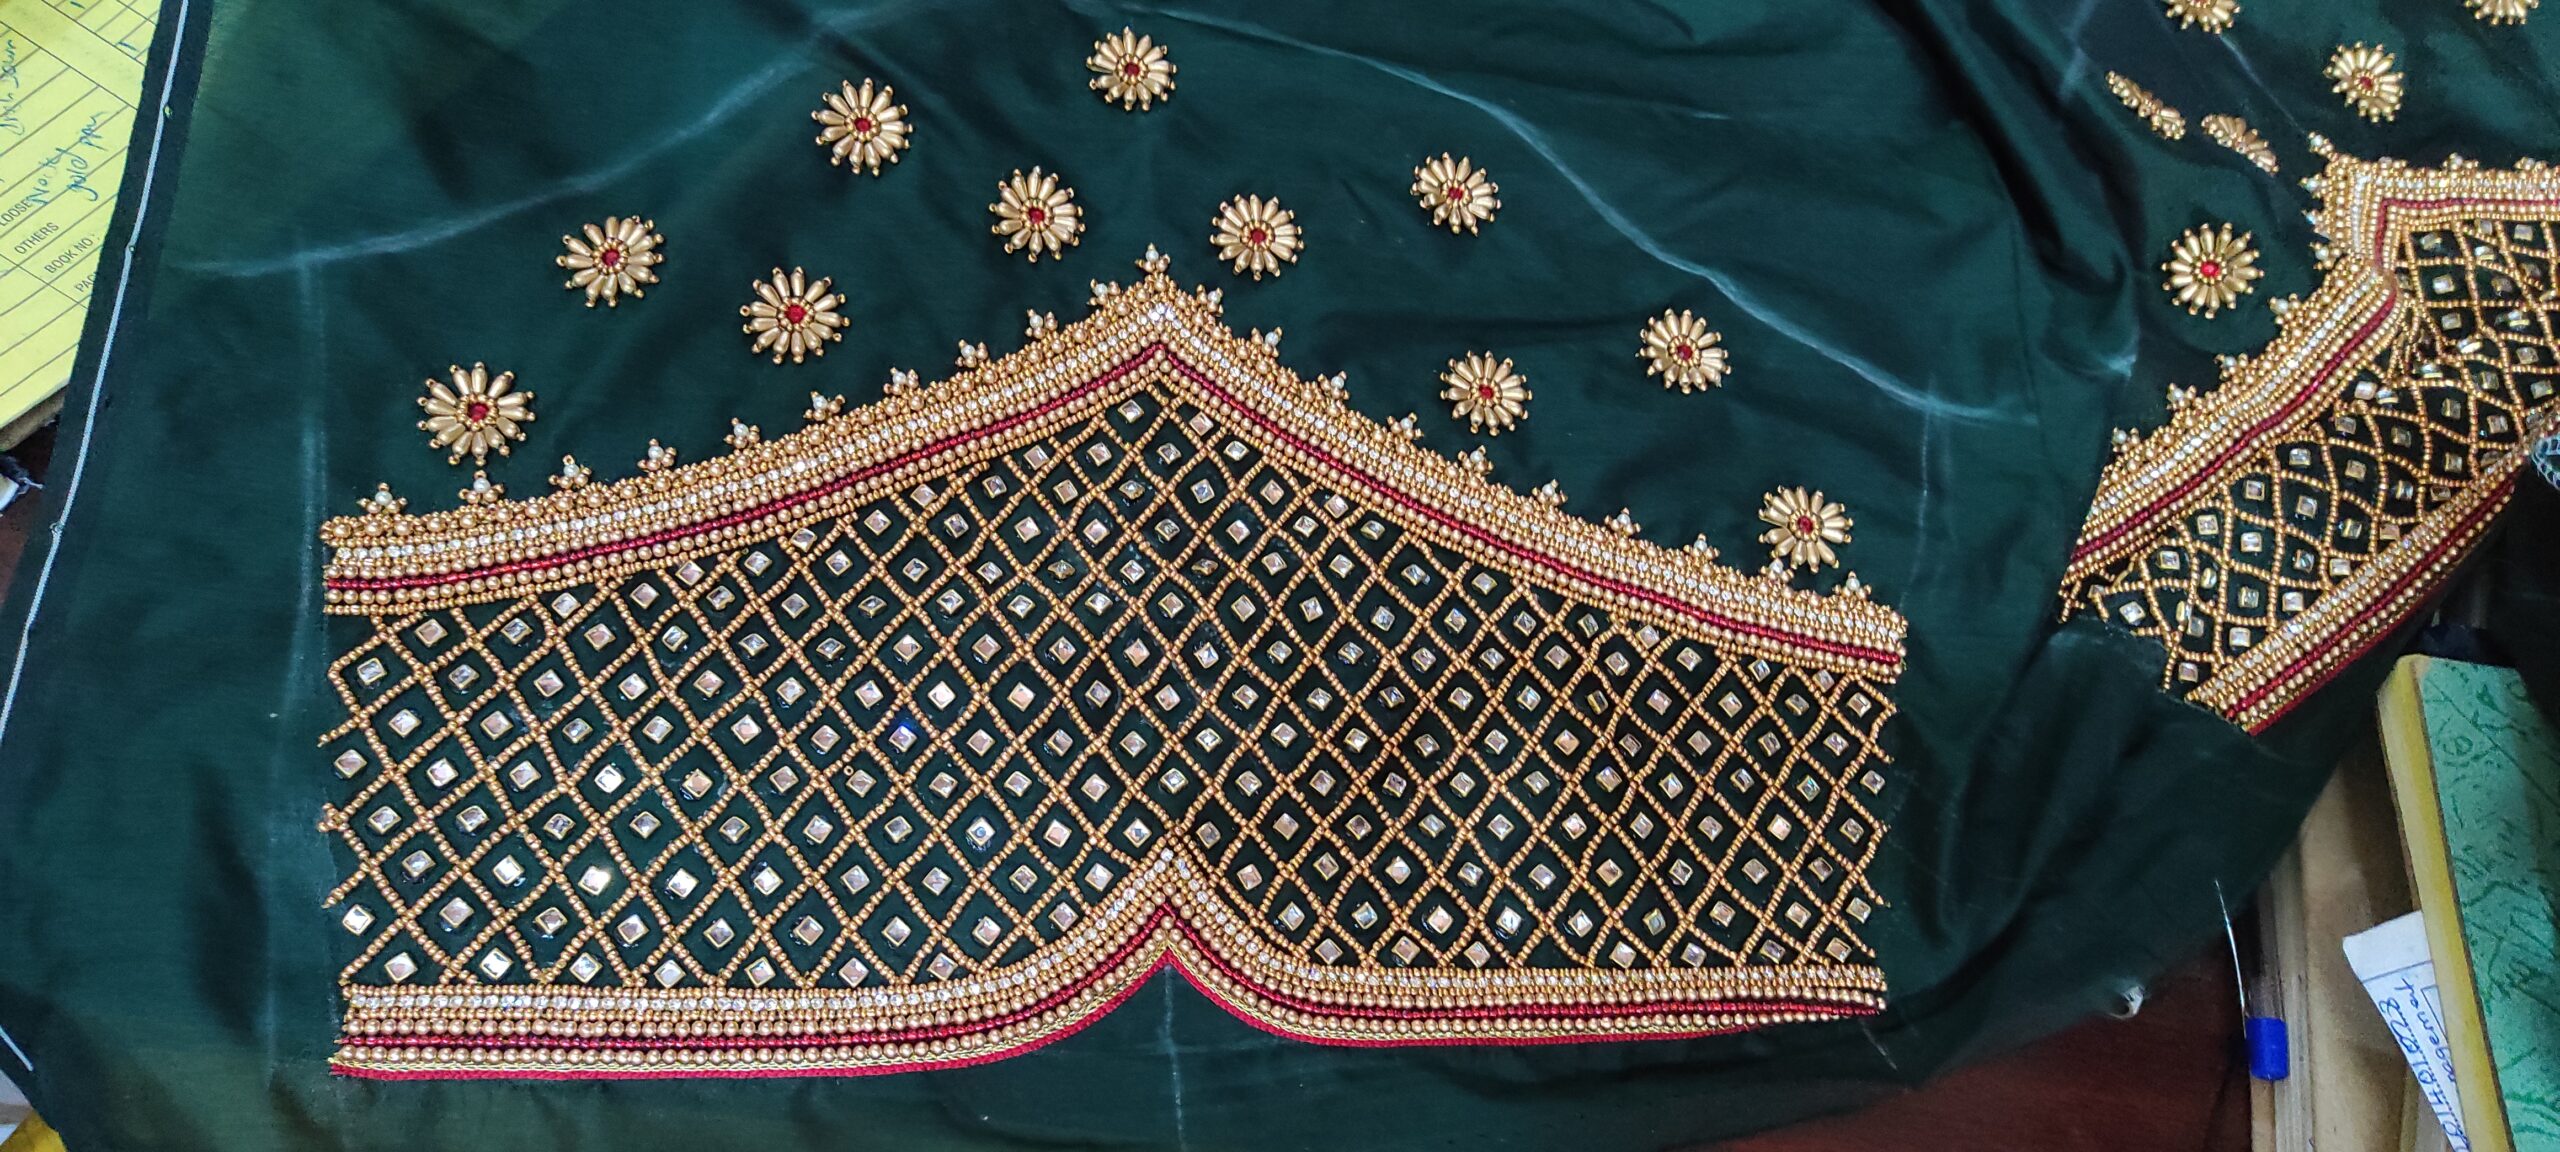 Aari embroidery classes in Chennai: create stunning Embroidery designs